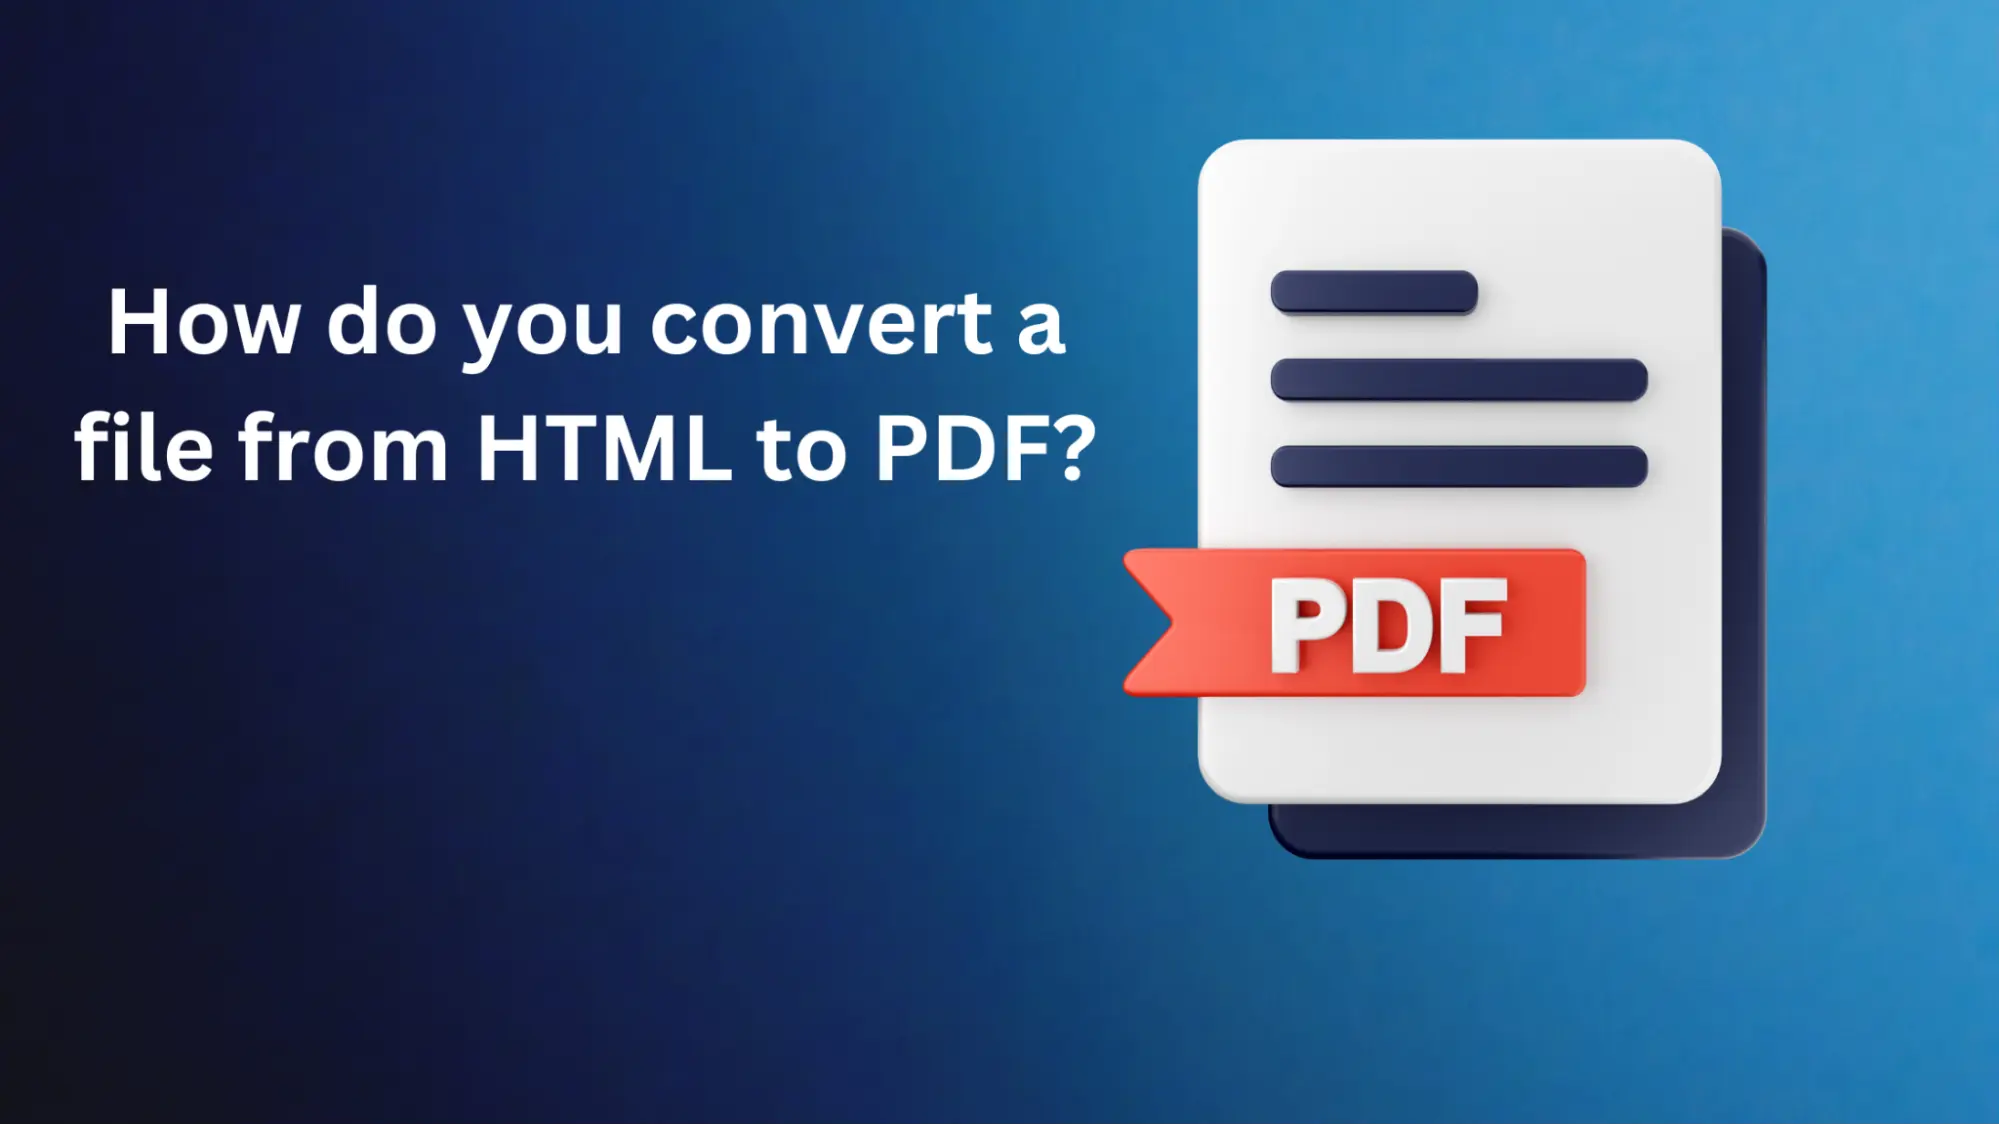 How do you convert a file from HTML to PDF?